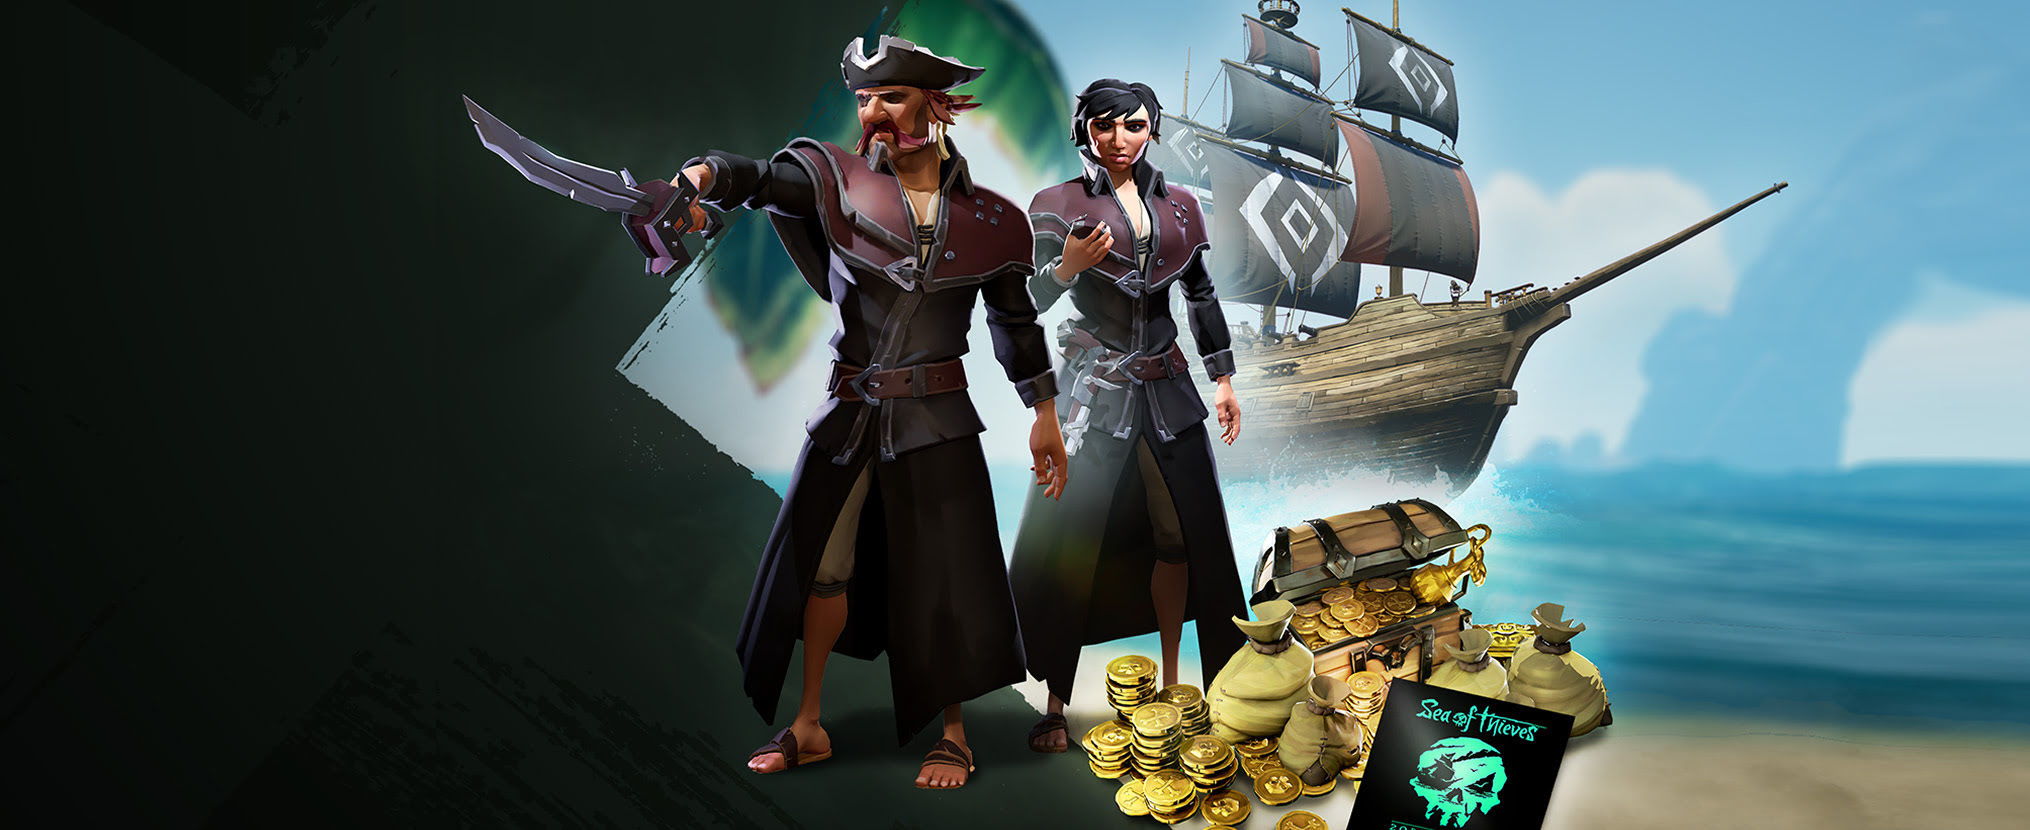 Sea of thieves ps4. Sea of Thieves PLAYSTATION. Sea of Thieves рыбалка. Карта рыбалки Sea of Thieves. Sea of Thieves Deluxe Edition.